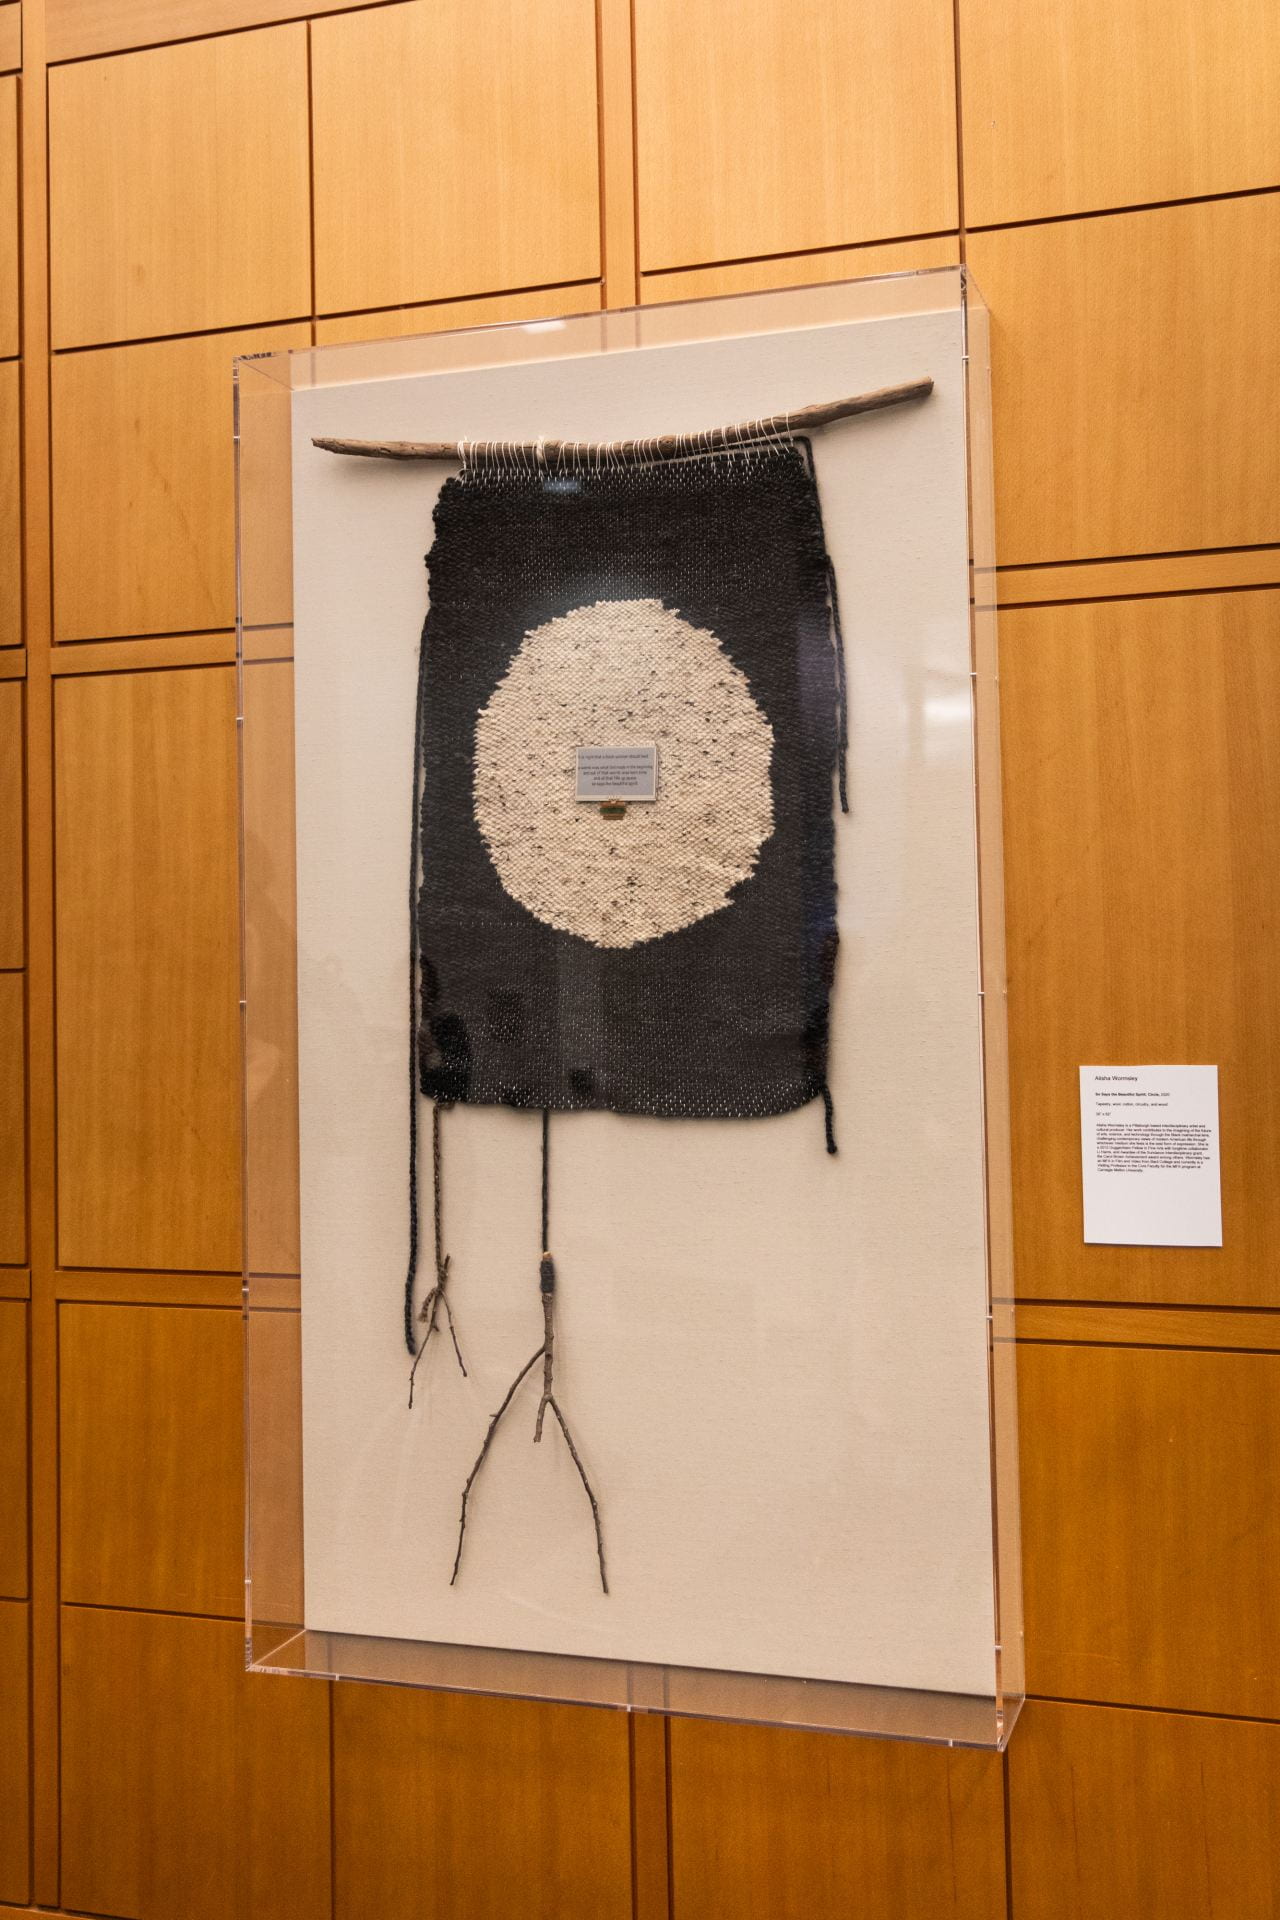 Tapestry hanging from large stick. Tapestry is black with white circle in the middle, and a circuit board in the middle of the circle. 